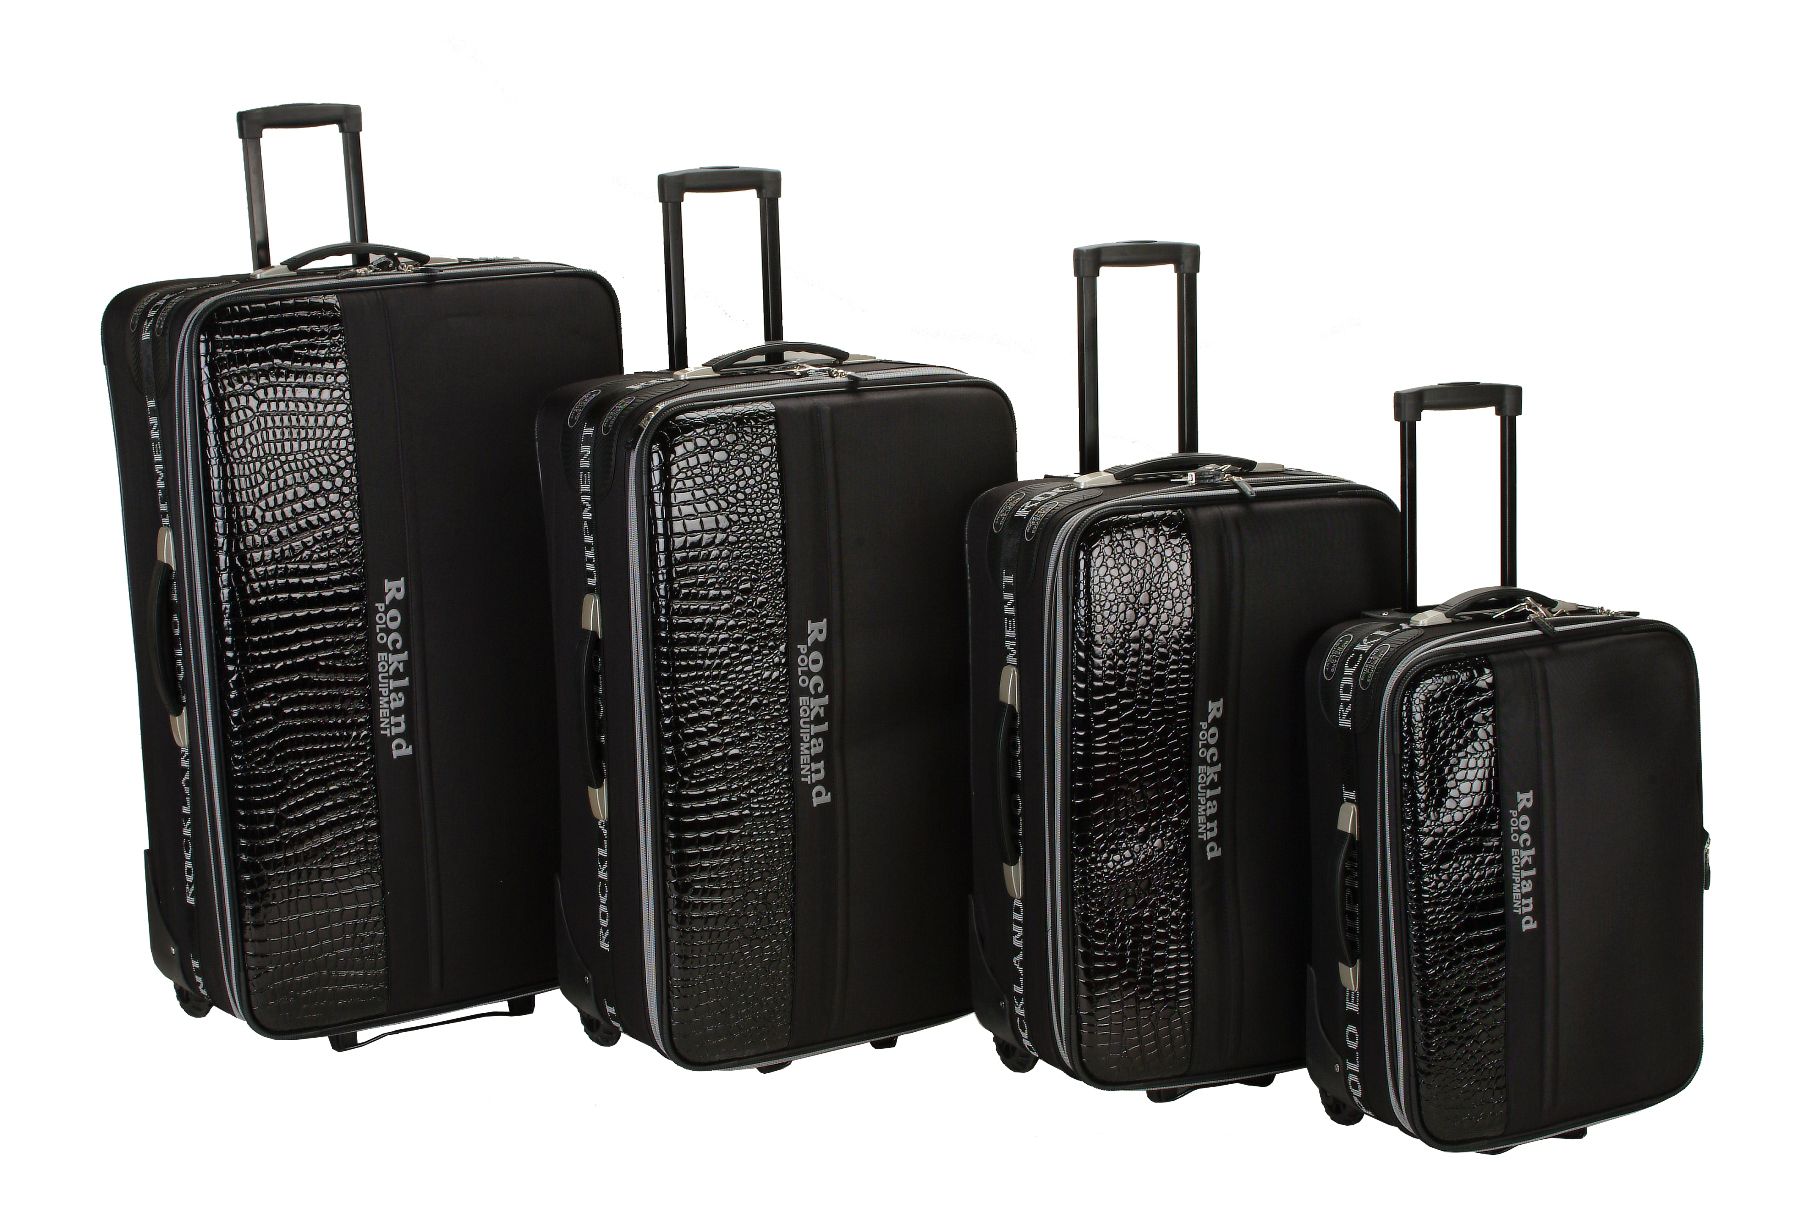 4 PIECE ROCKLAND POLO EQUIPMENT LUGGAGE SET WITH CROCODILE ACCENT